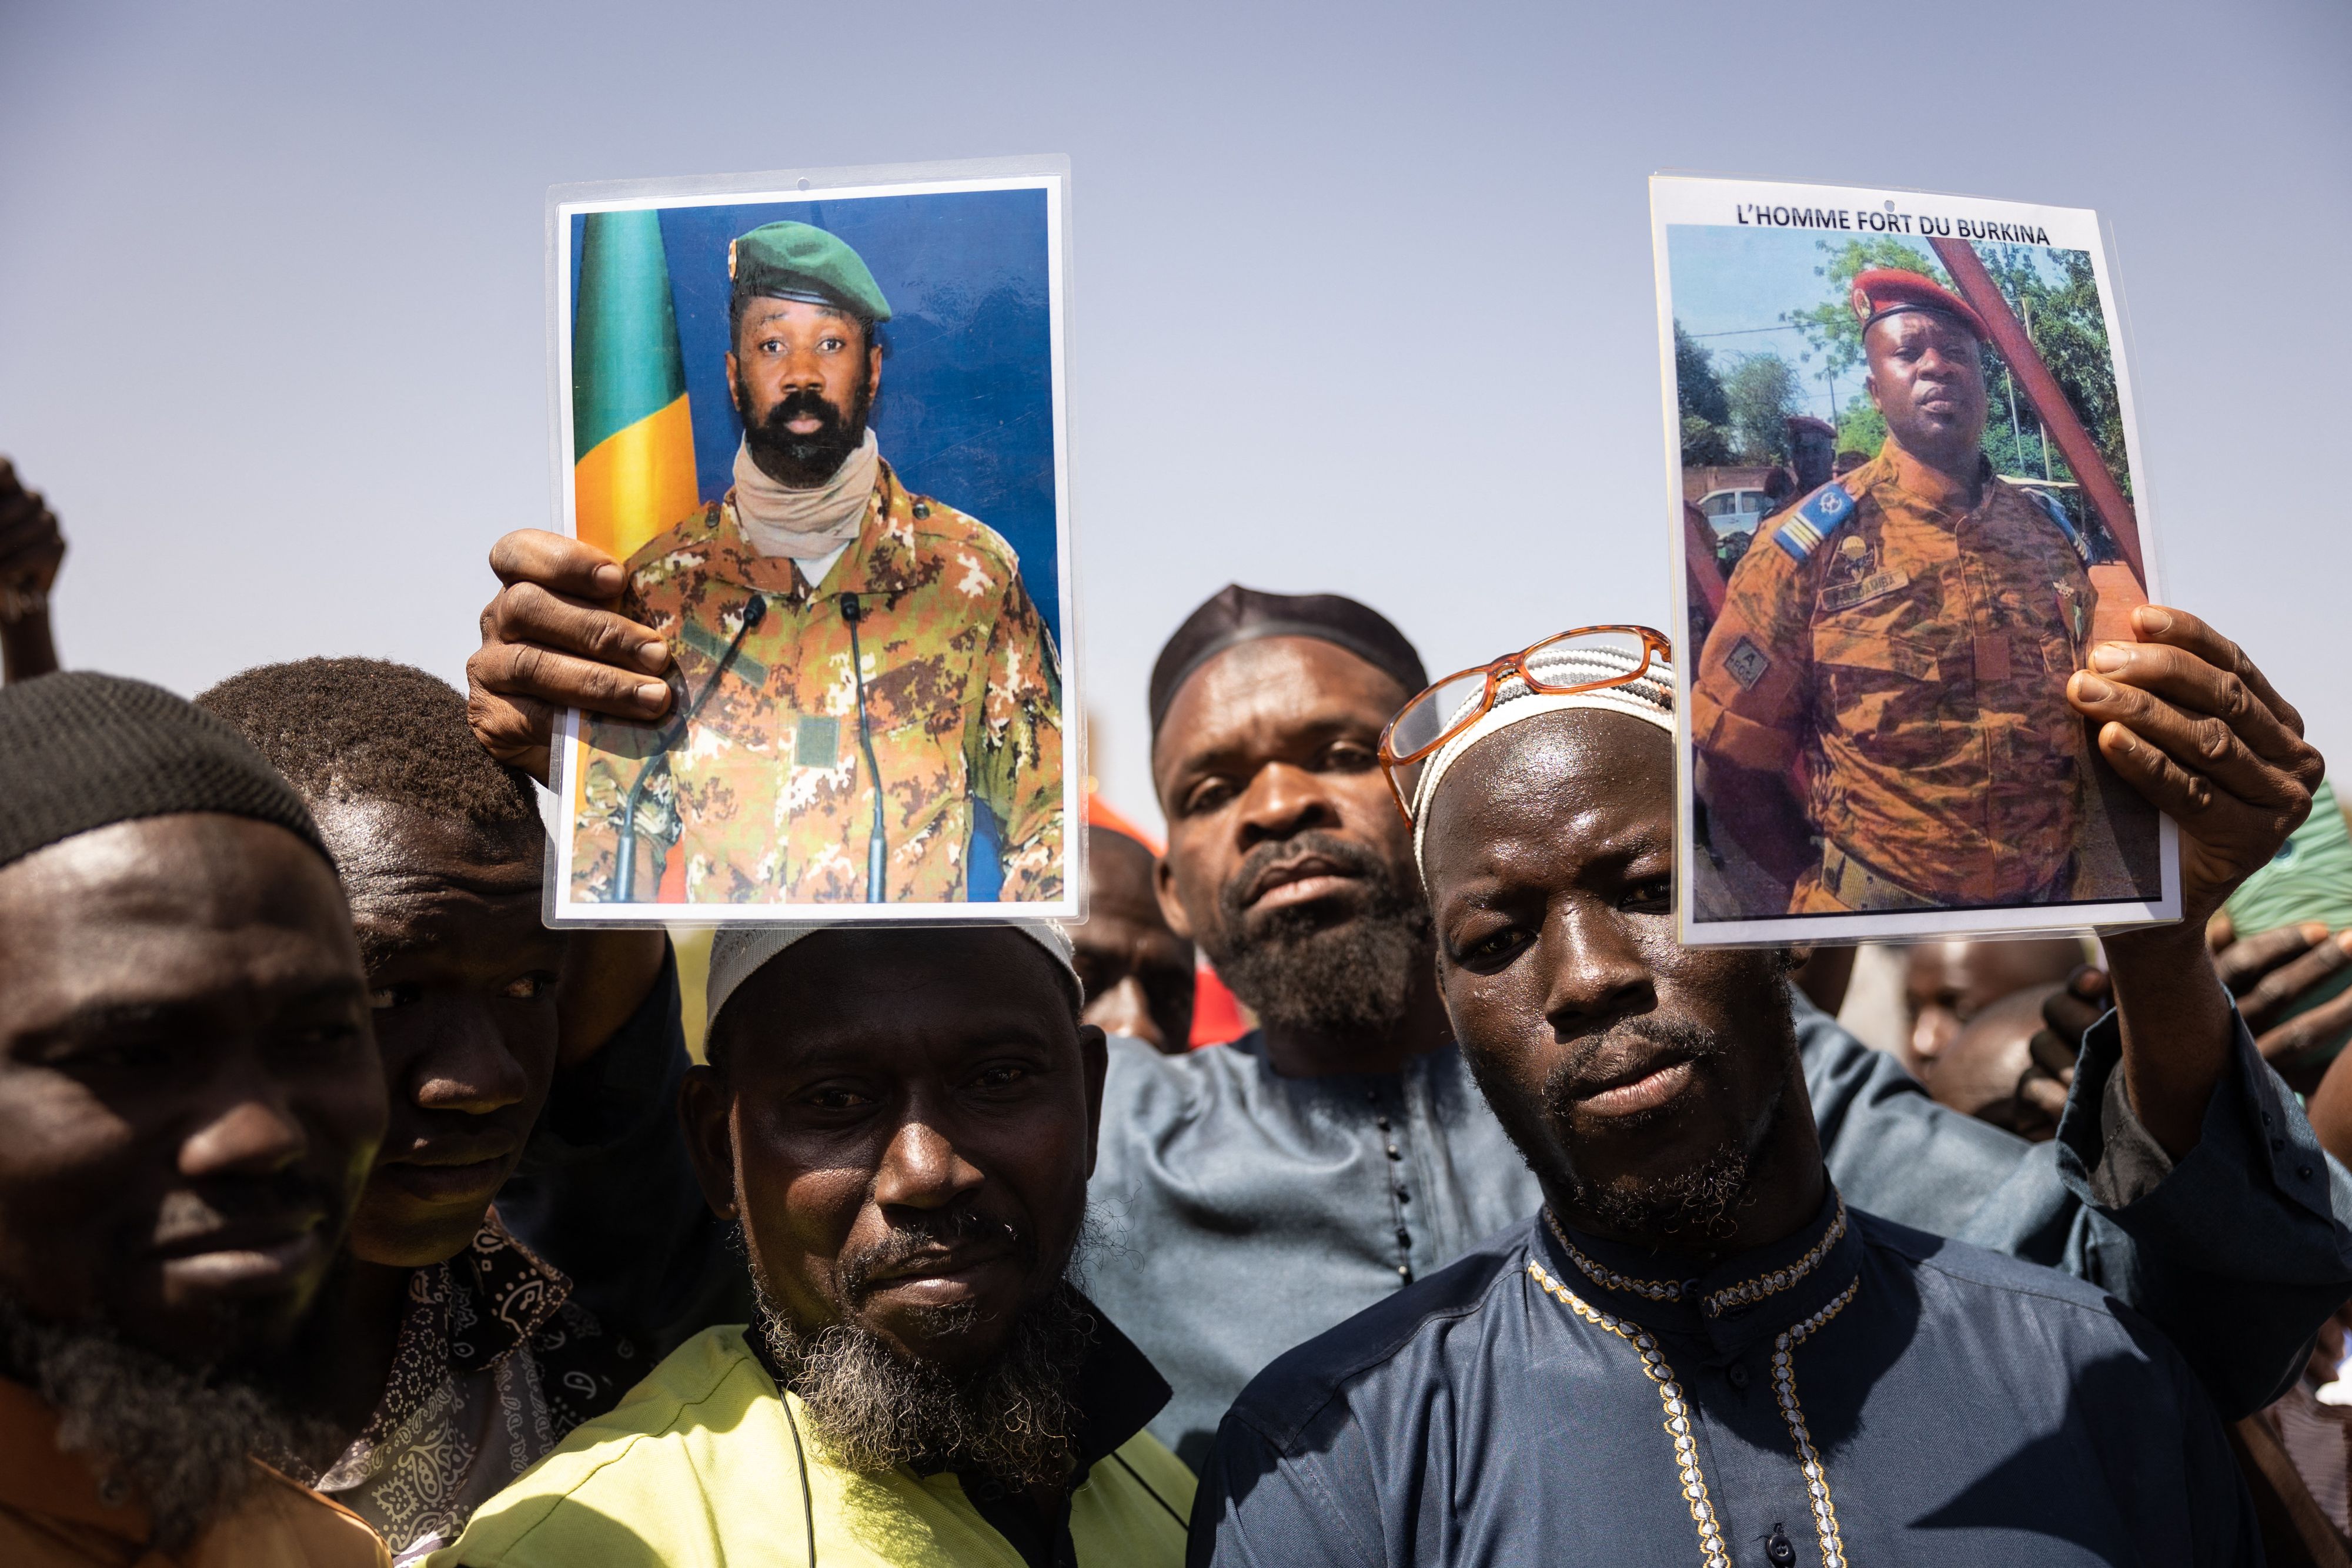 Demonstrators gathering in Ouagadougou, Burkino Faso, to show support for the military hold a picture of Colonel Aissimi Goïta